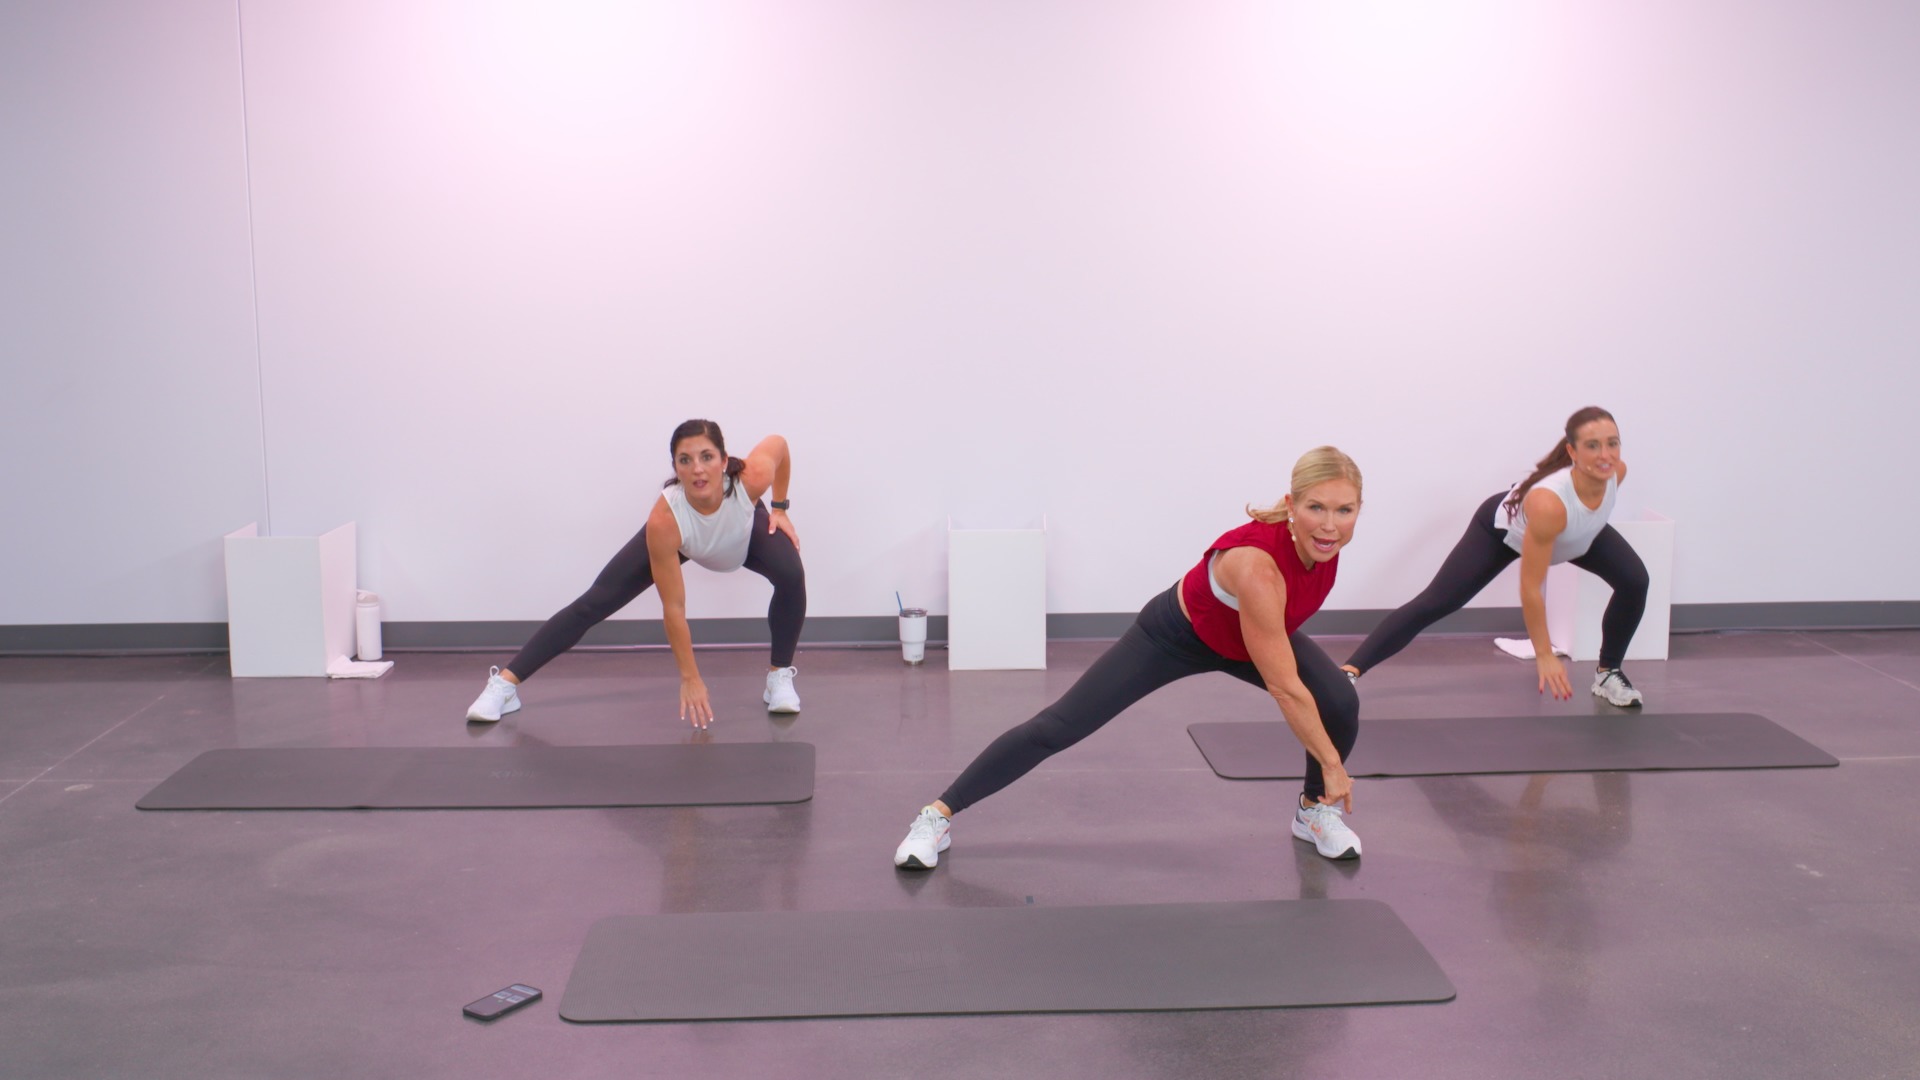 Three women working out on exercise mats